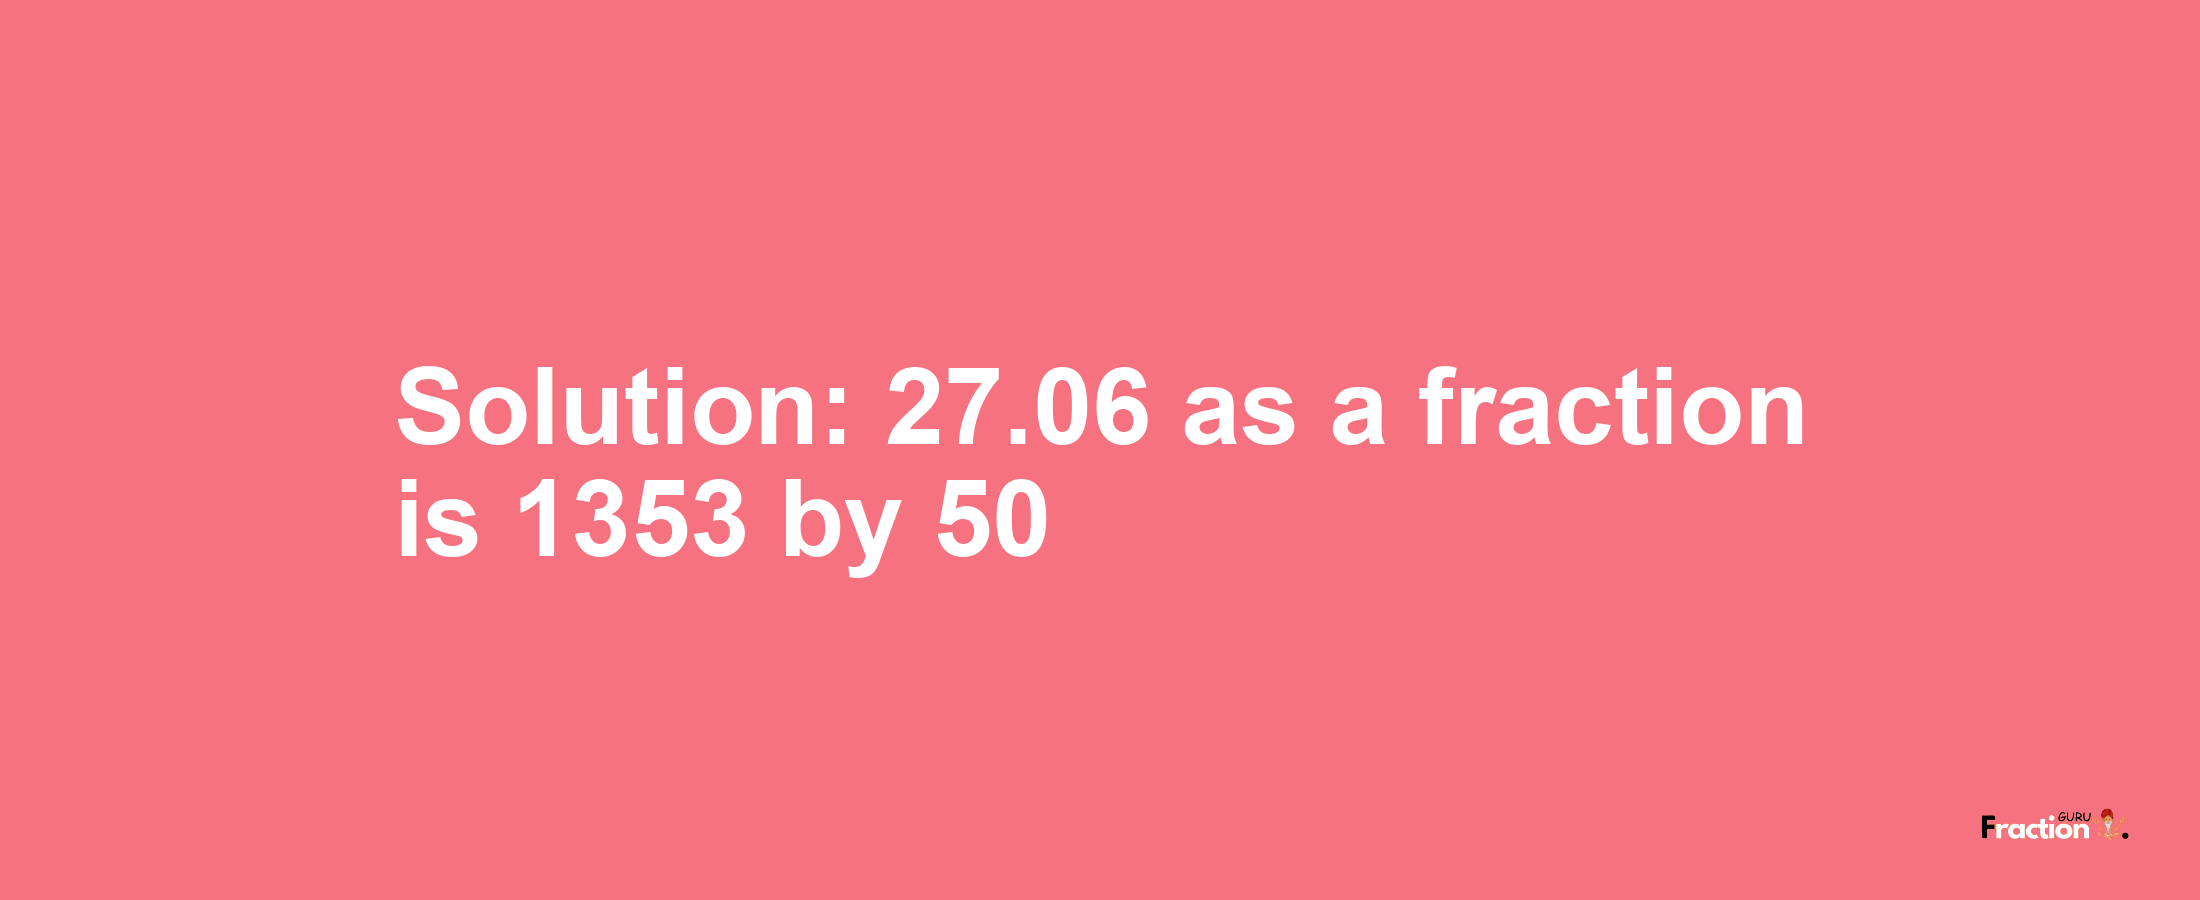 Solution:27.06 as a fraction is 1353/50